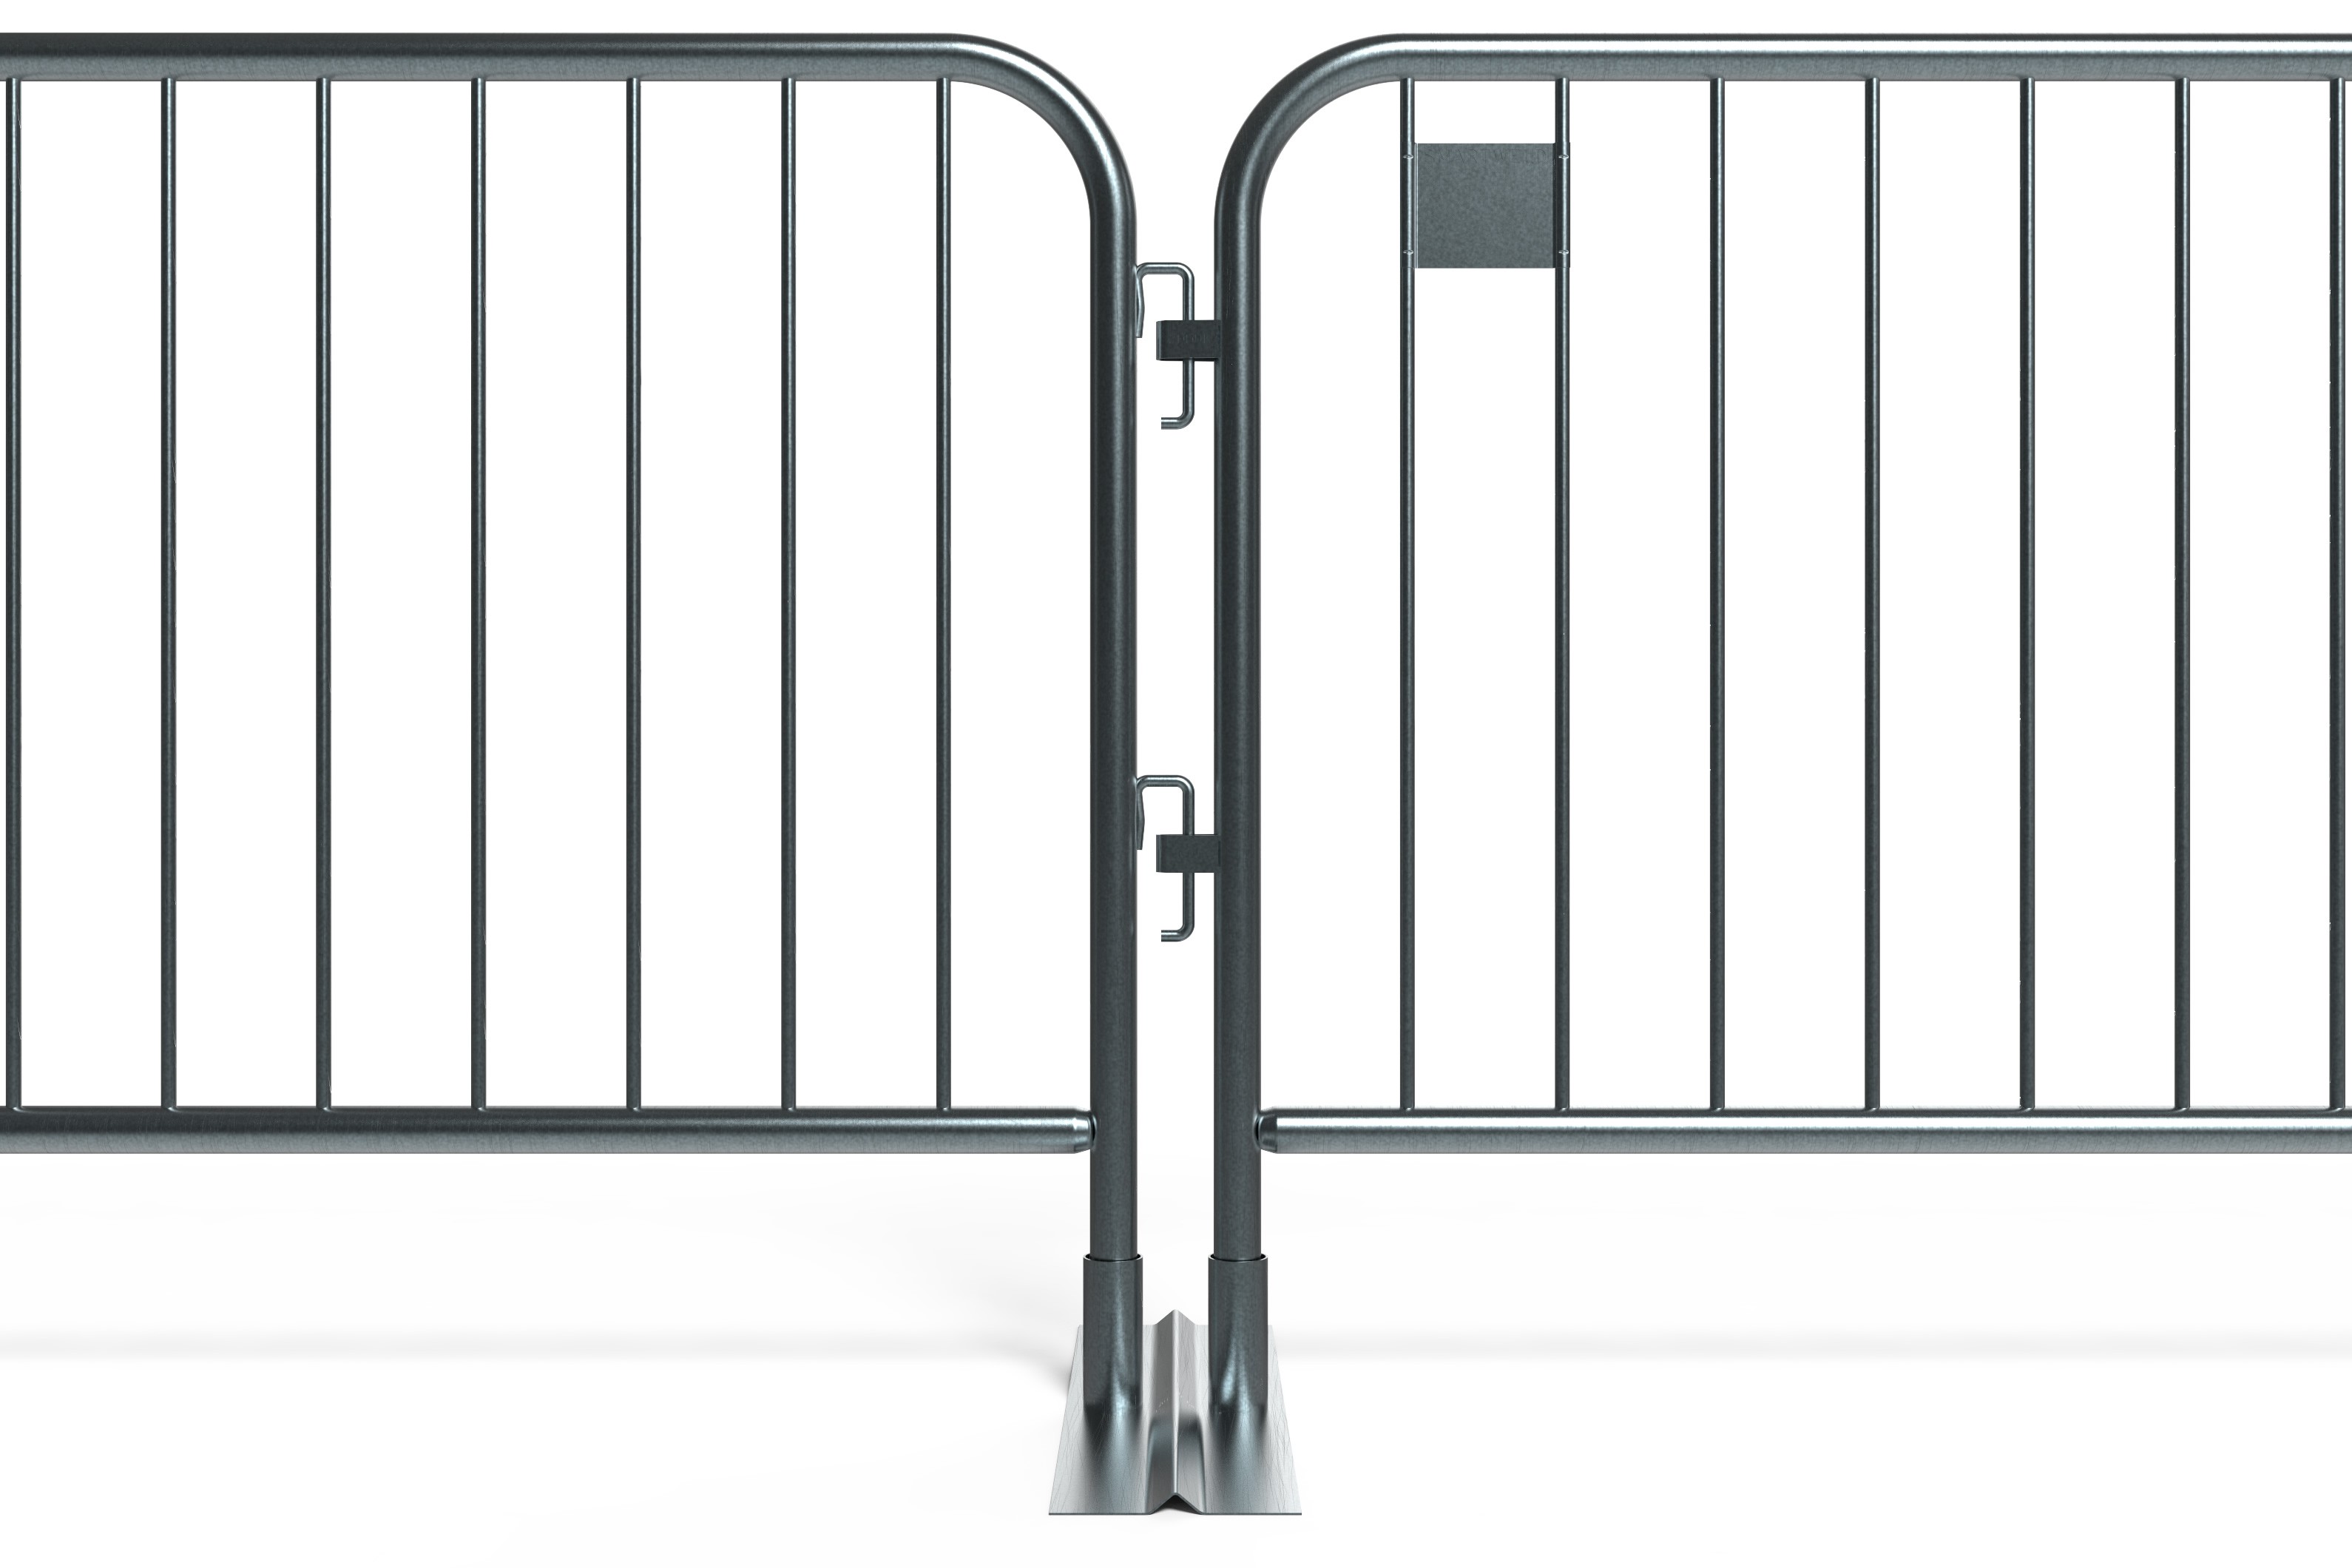 Connected Metal Barricades